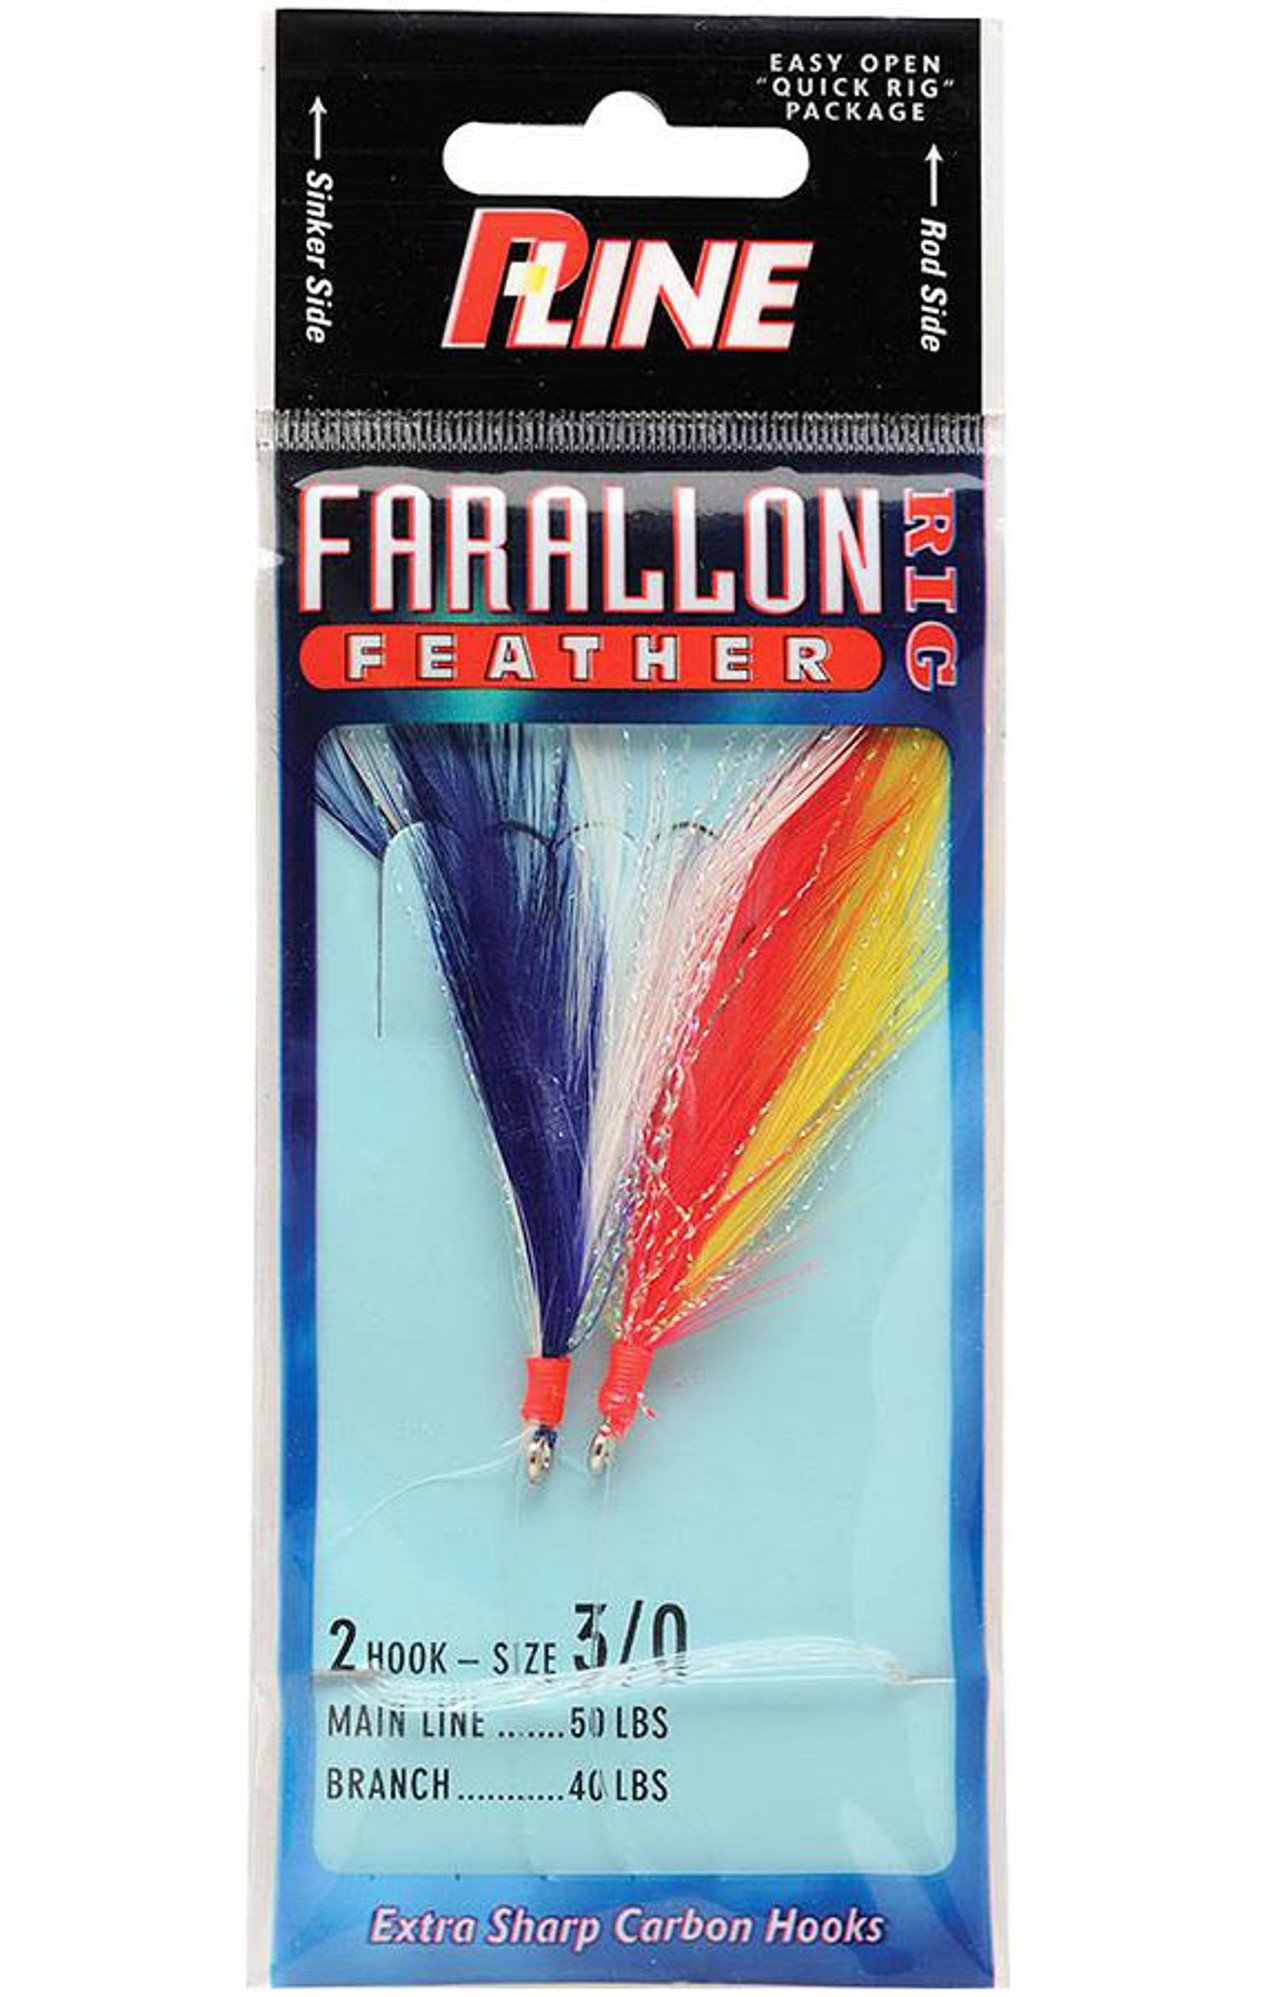 P-Line Farallon Feathers Vertical Fishing Jigs (Size: 5/0 Mix)